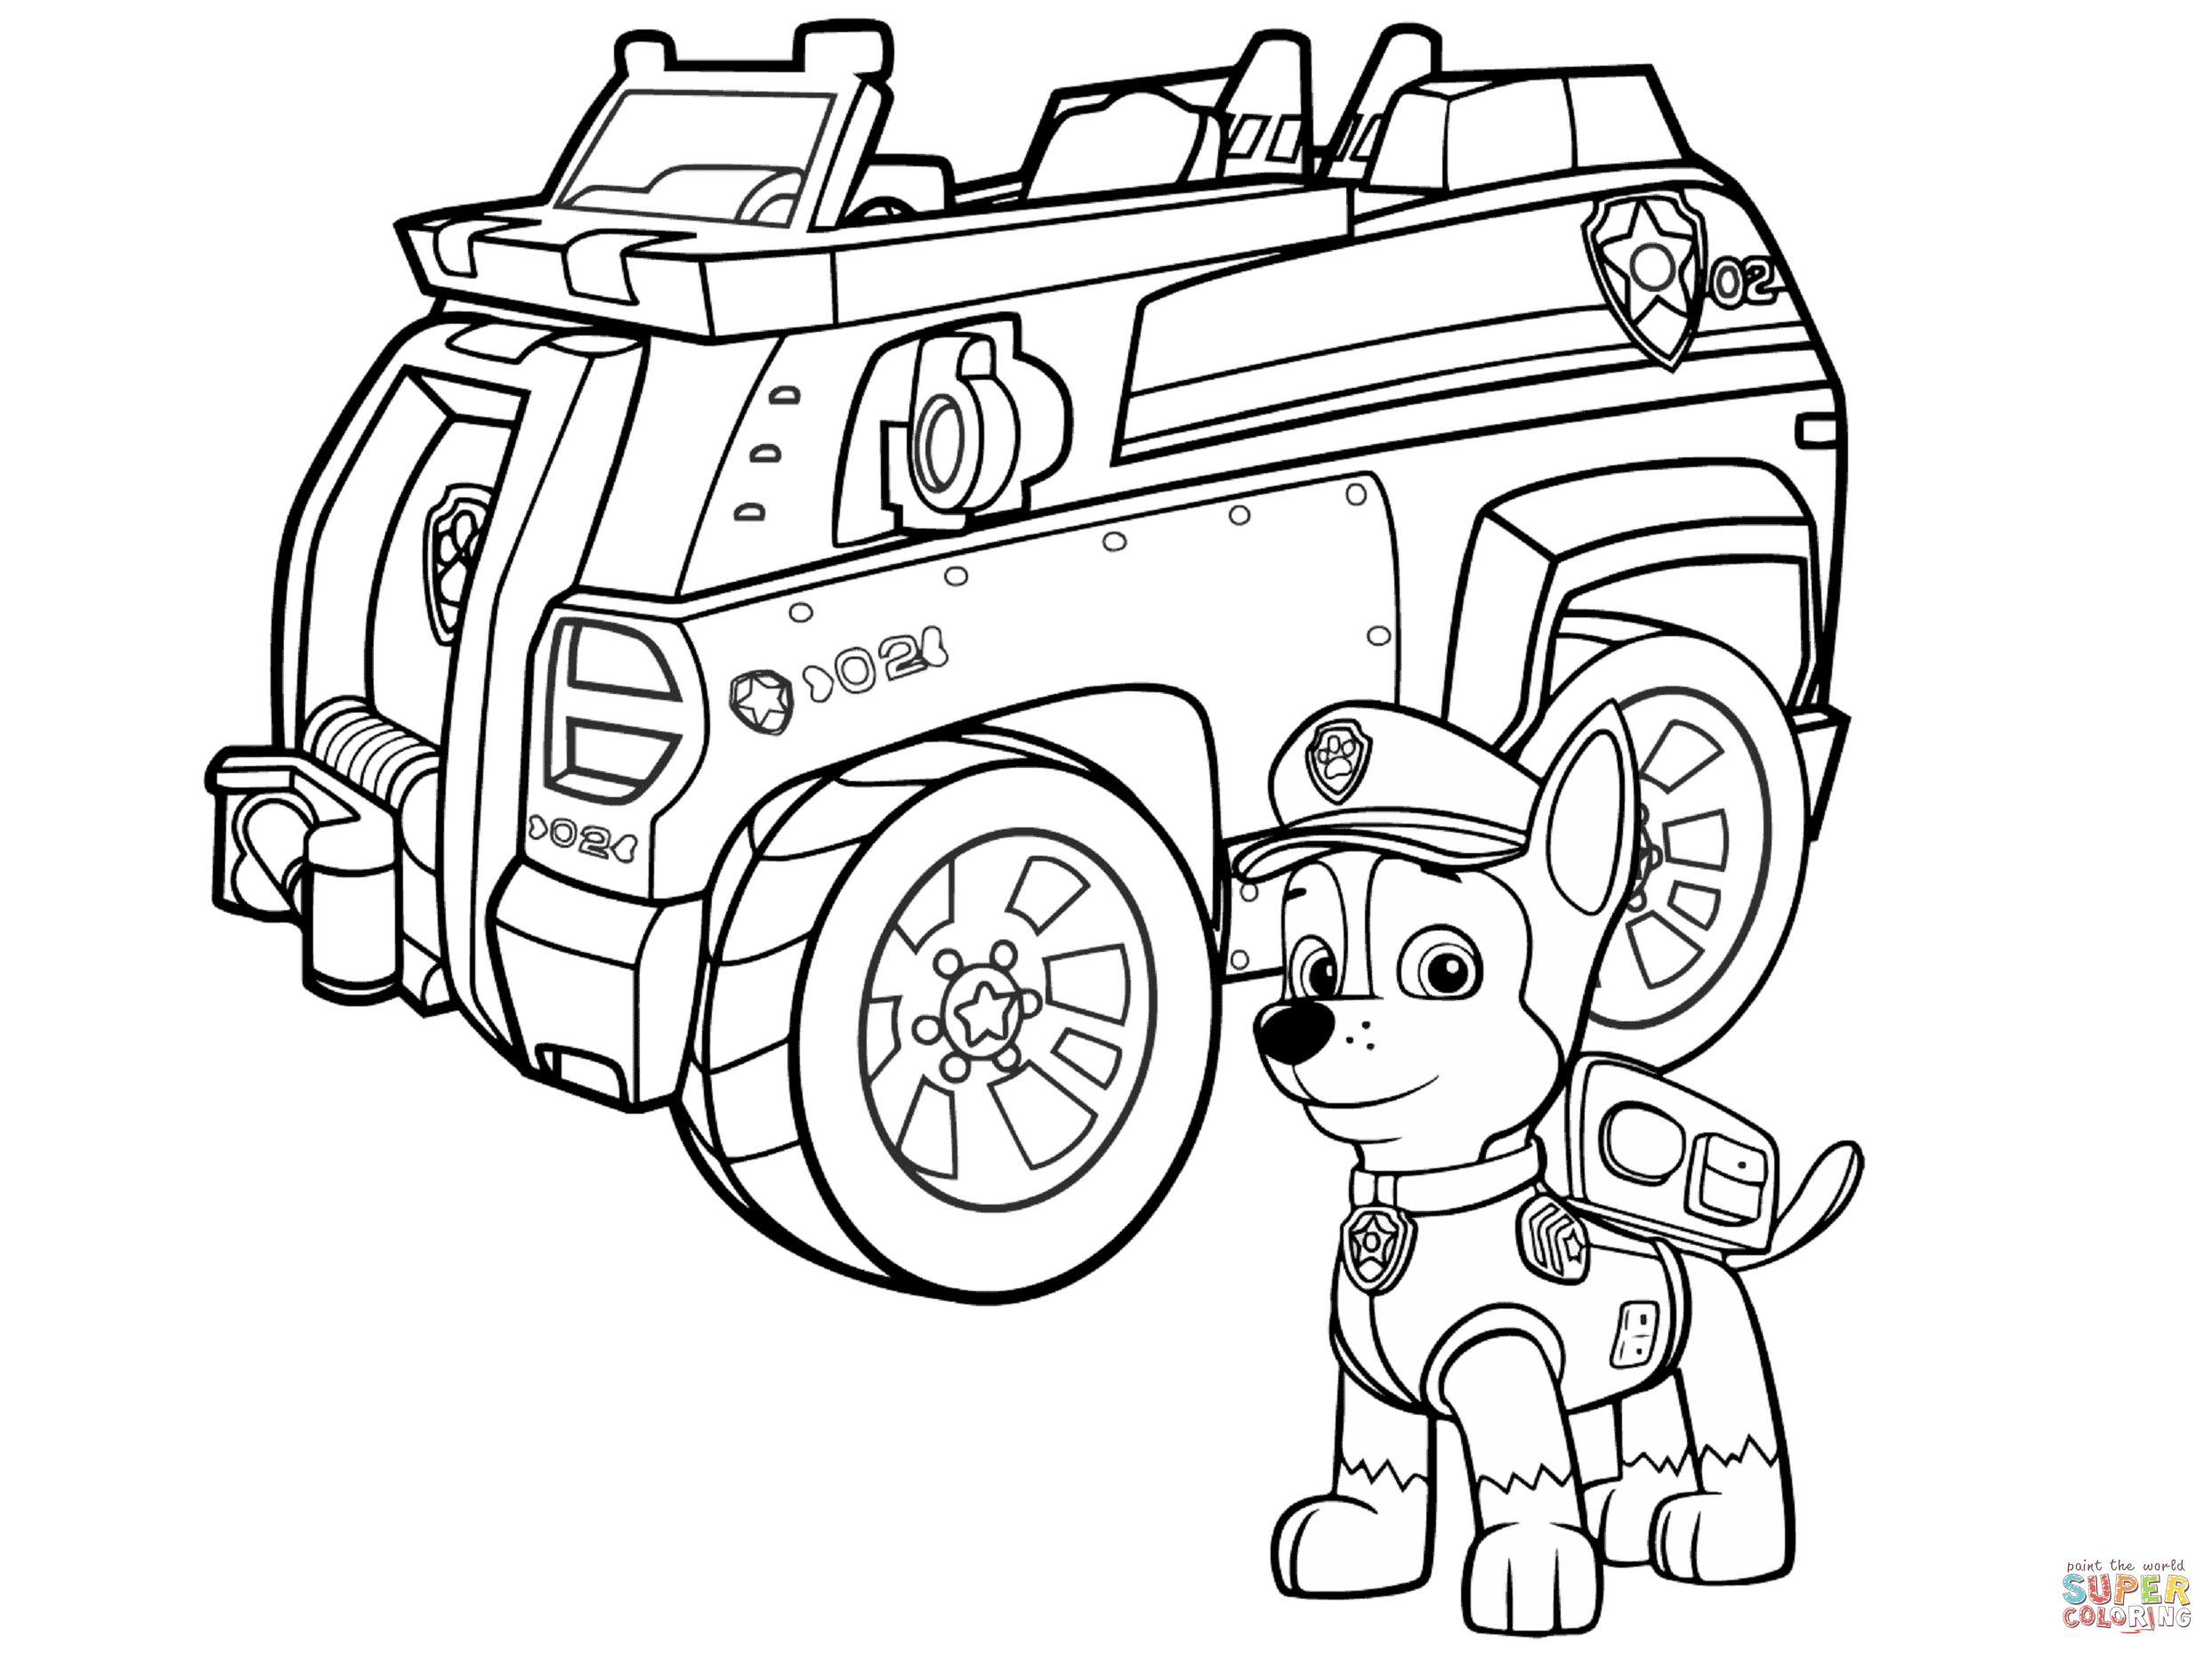 Paw patrol chase police car coloring page free printable coloring pages